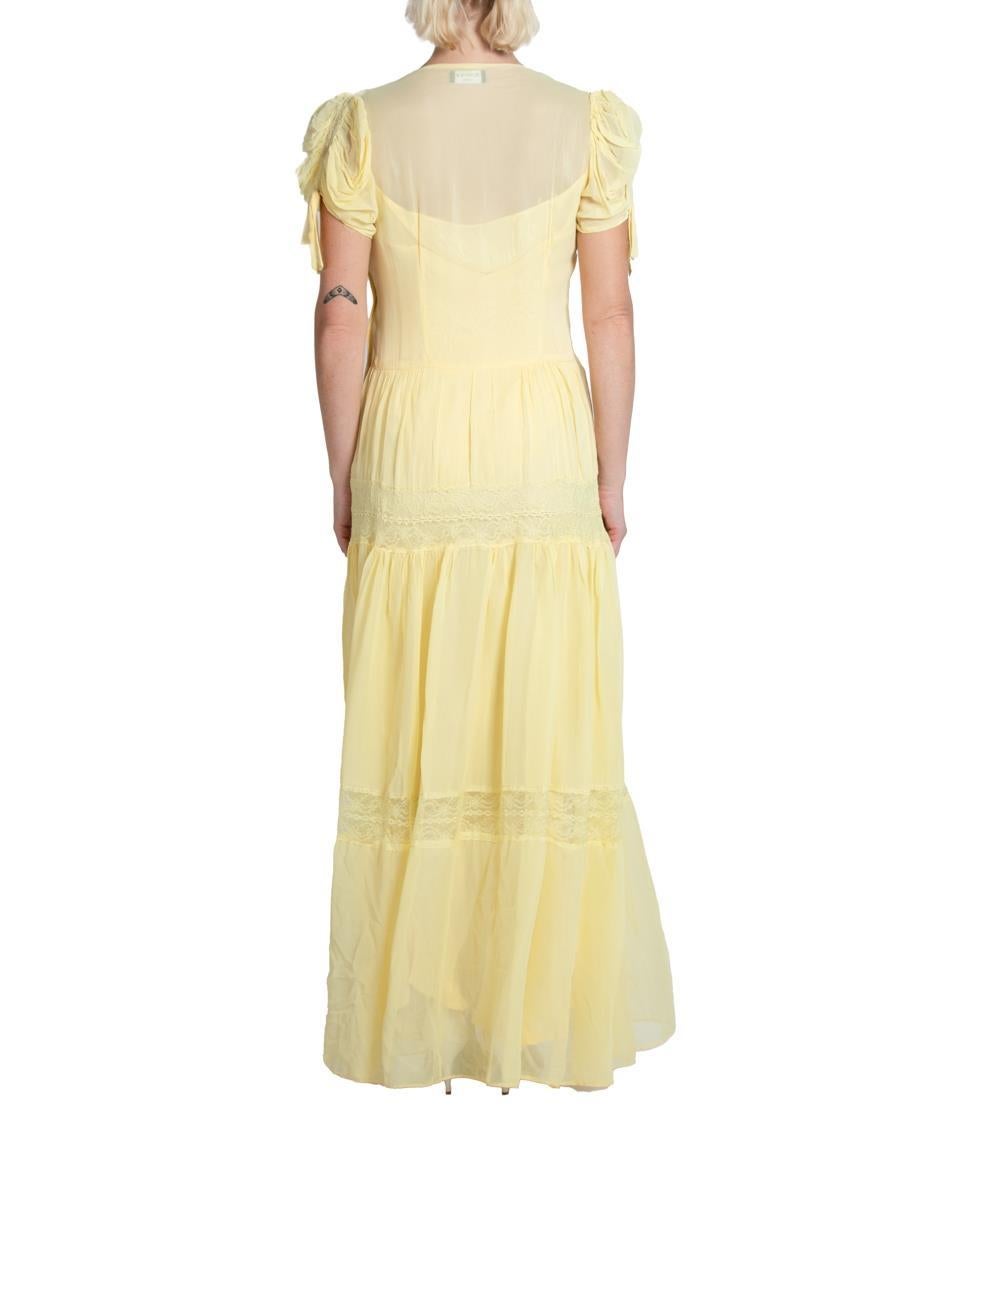 1940S Yellow Chiffon Gown With Tiers Of Lace Trim For Sale 2